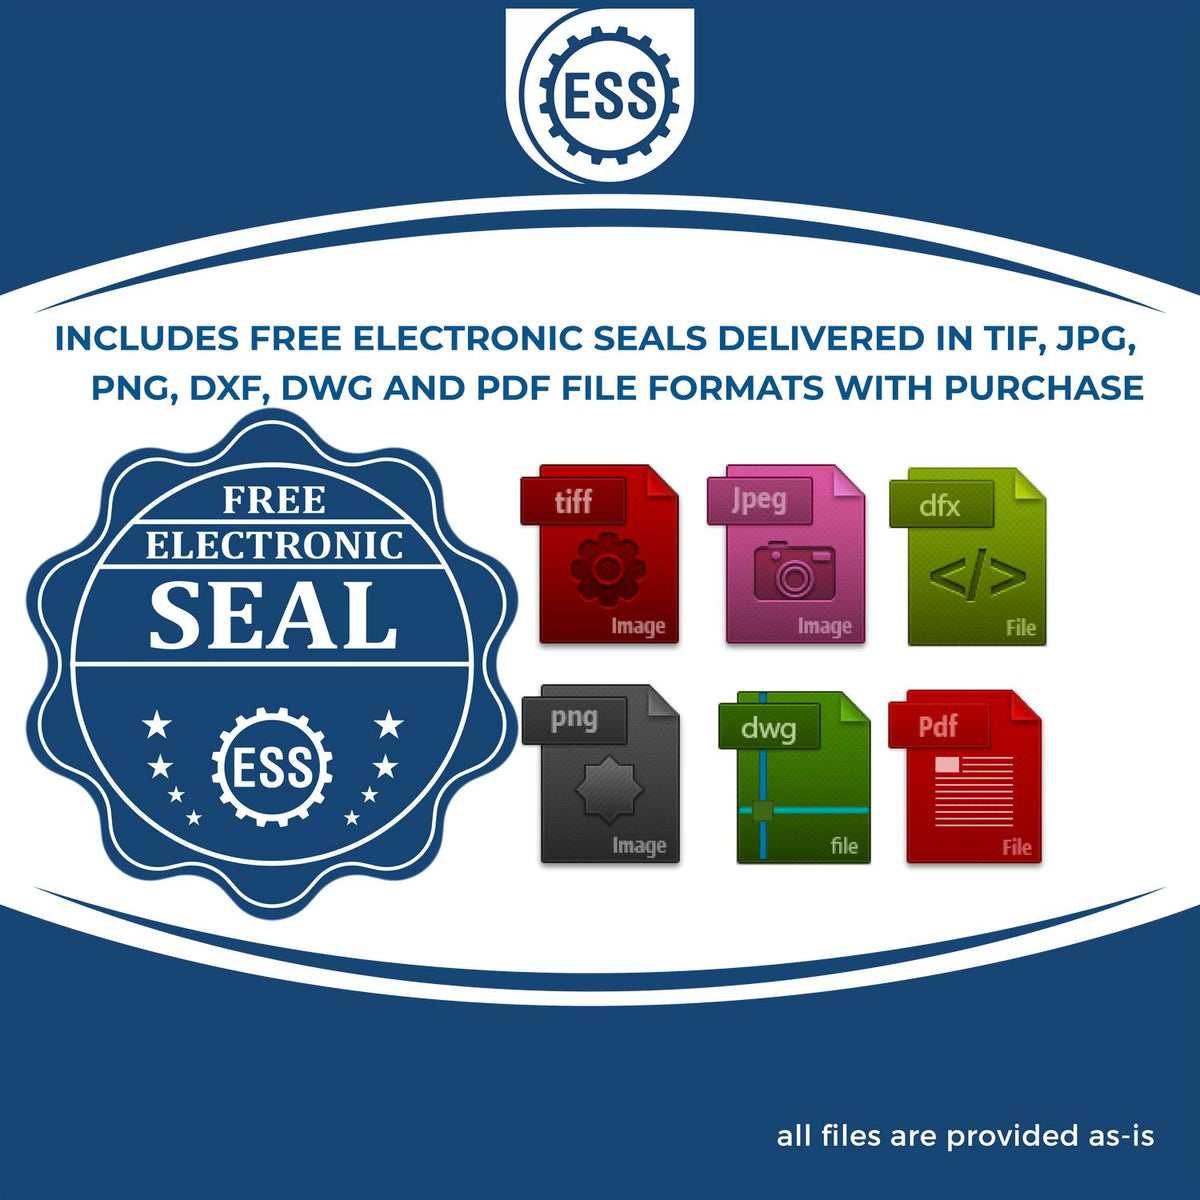 An infographic for the free electronic seal for the Slim Pre-Inked State Seal Notary Stamp for Nevada illustrating the different file type icons such as DXF, DWG, TIF, JPG and PNG.